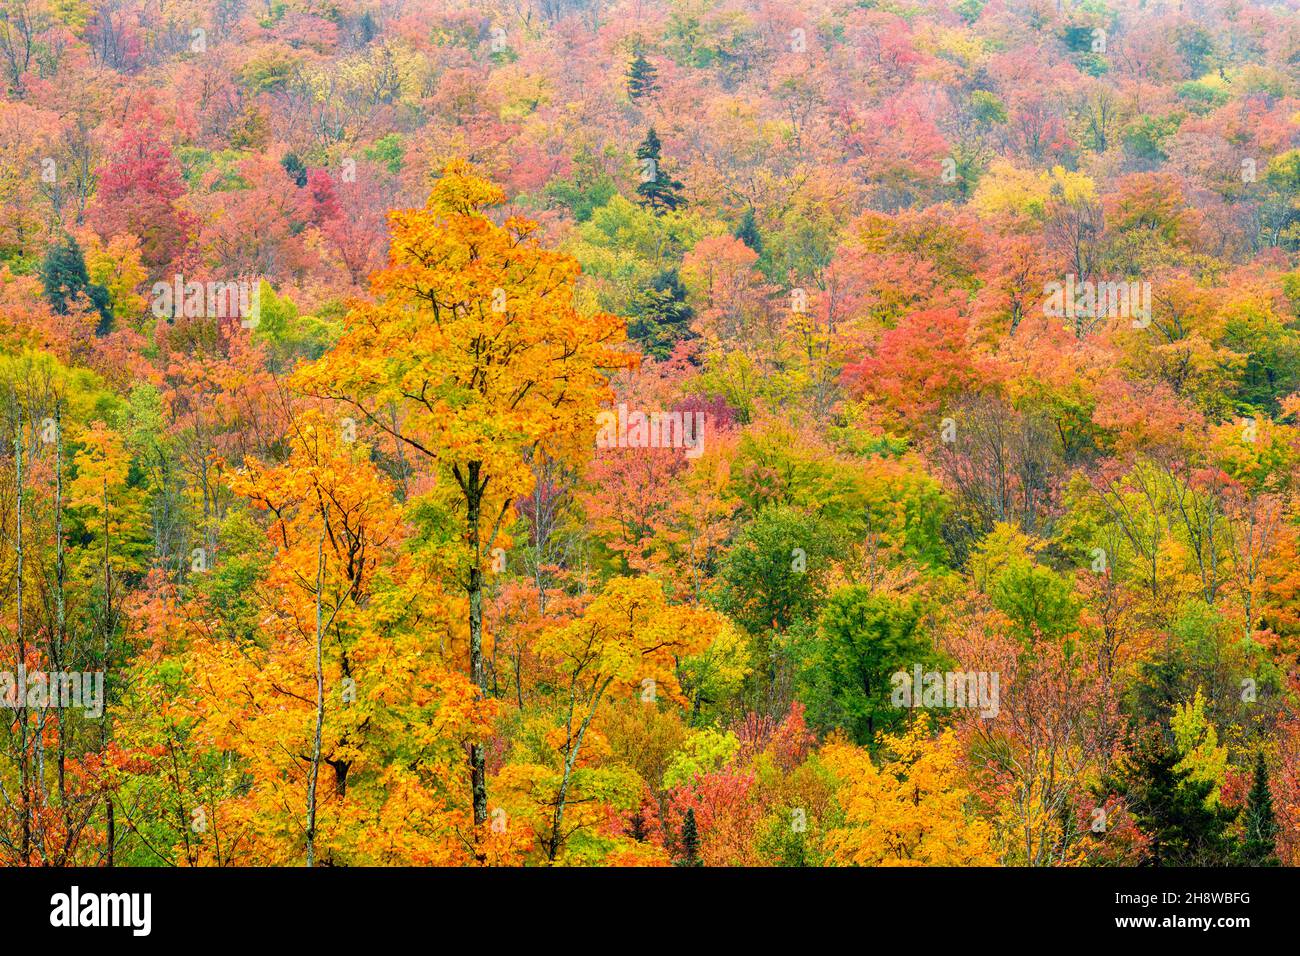 Autumn foliage in the deciduous forest on New England hillsides, Along US 2, New Hampshire, USA Stock Photo